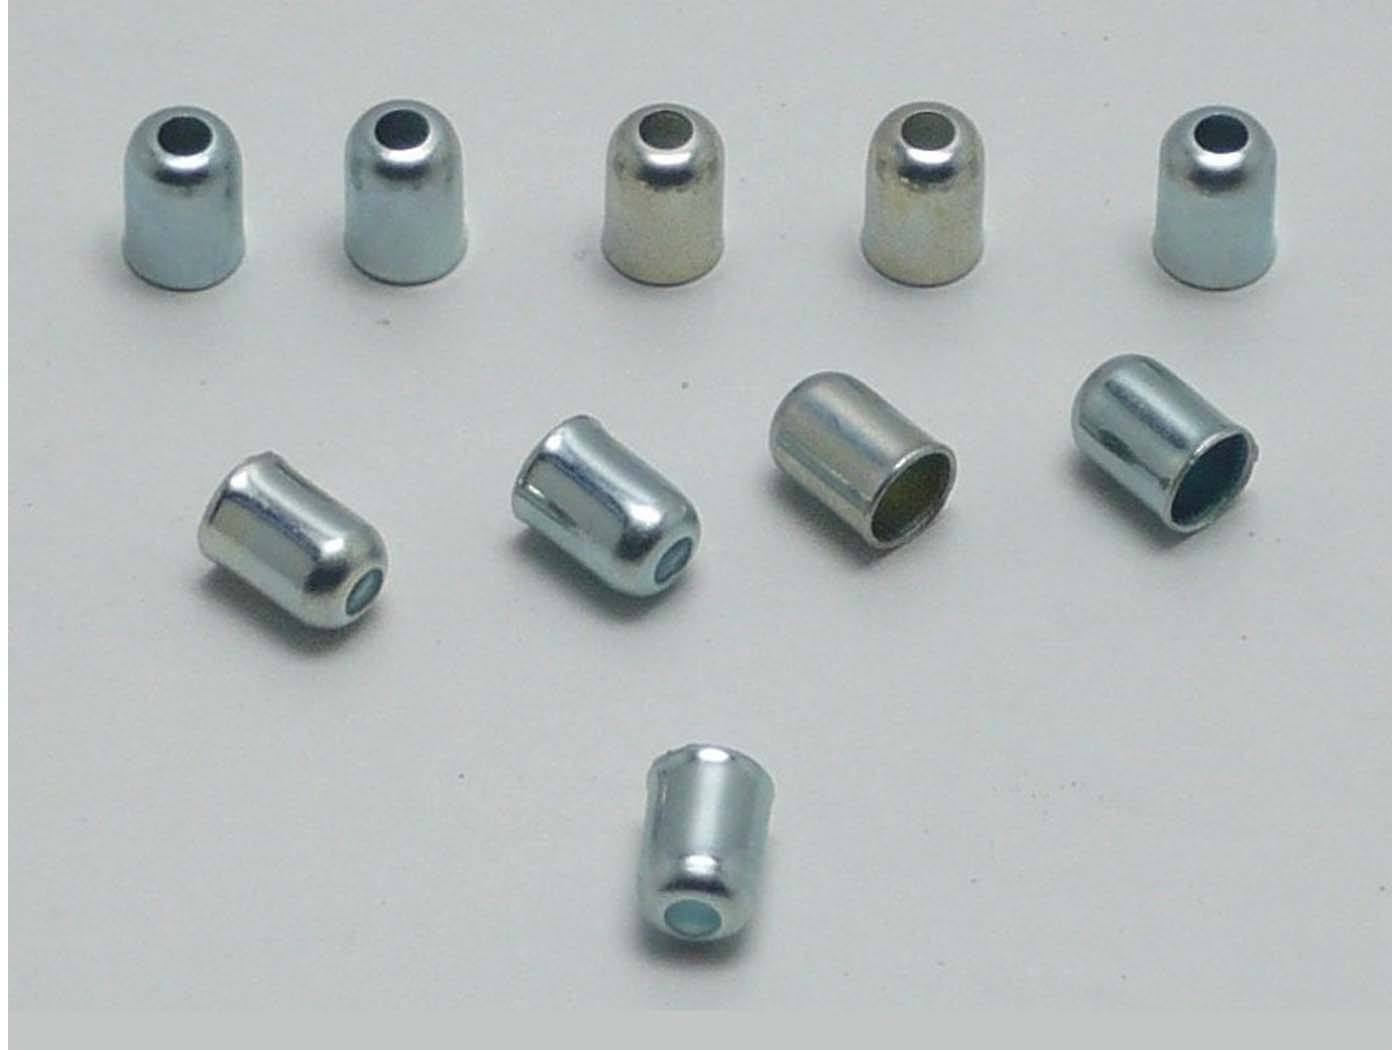 End Sleeves Set Of 10 Pieces Mounting 5.1mm Deep 7mm Bore 2.6mm Outer Diameter 6mm For Moped, Moped, Mokick, KKR Motorcycles